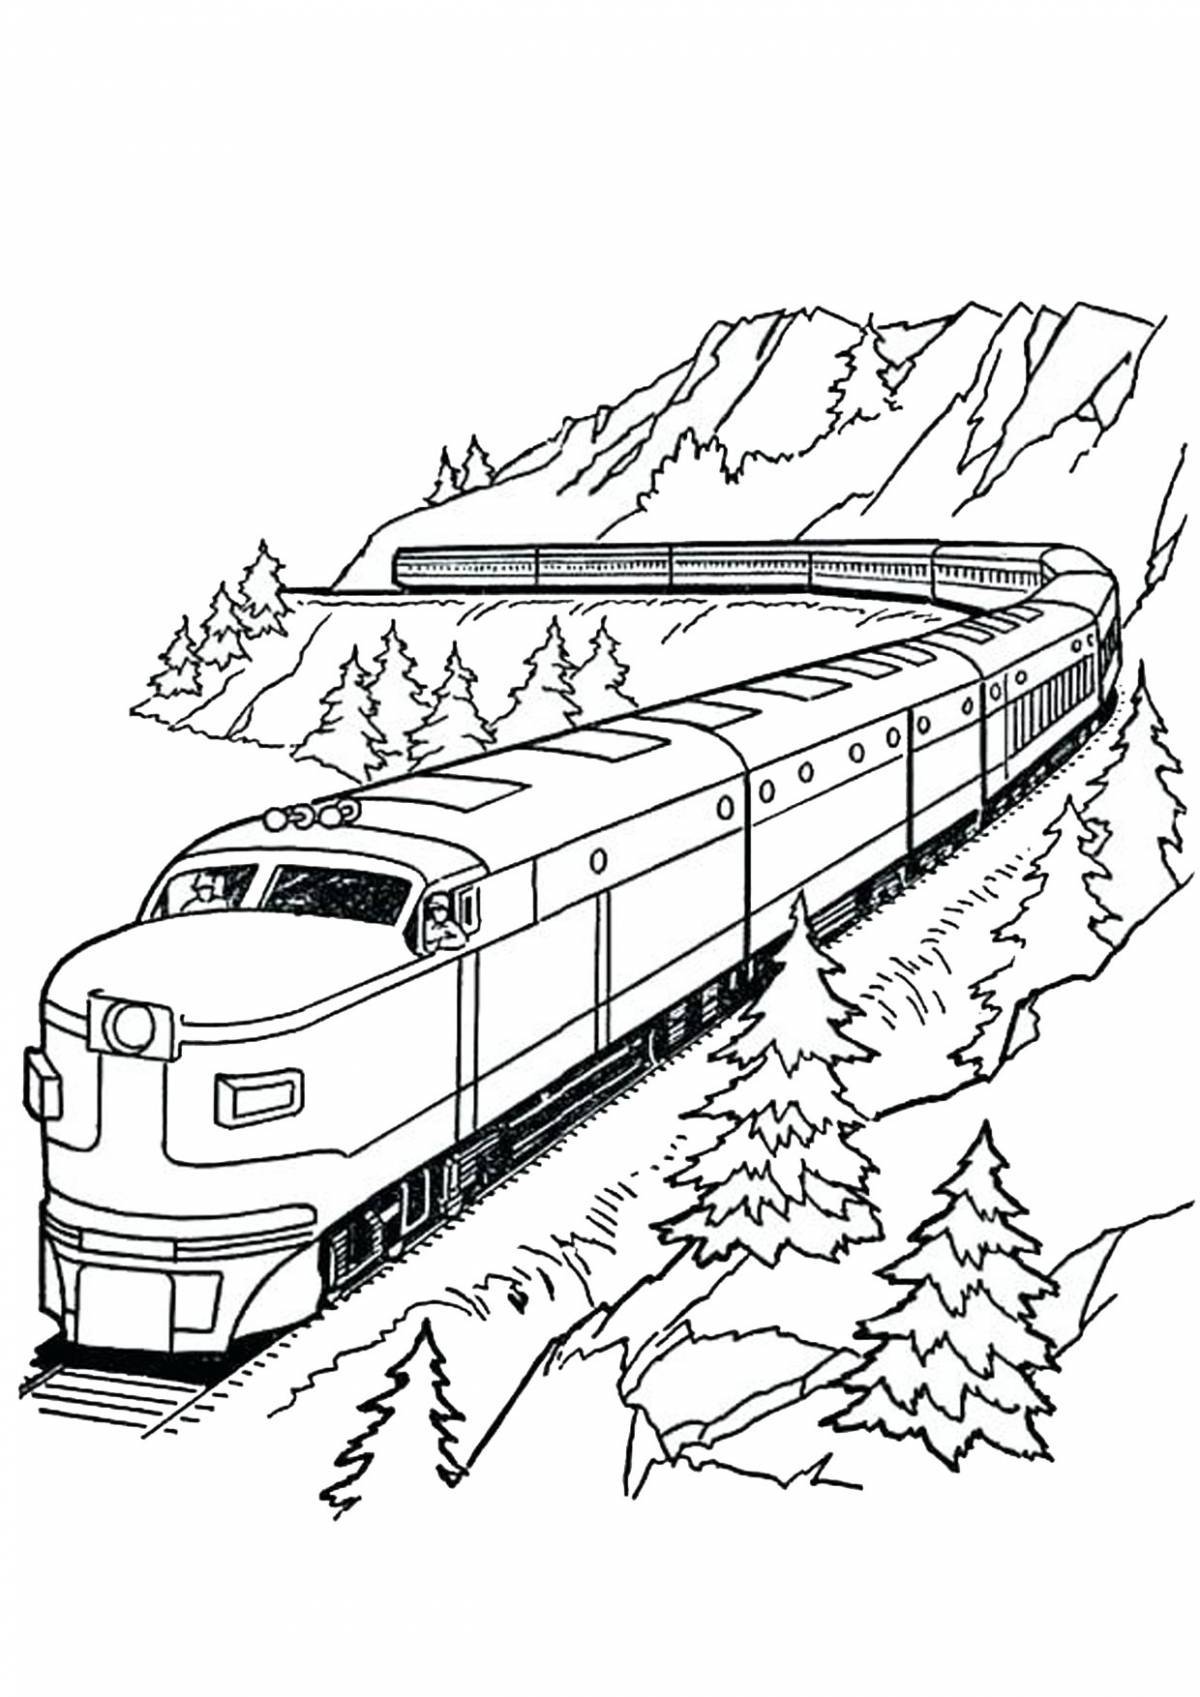 A fun train coloring book for teens